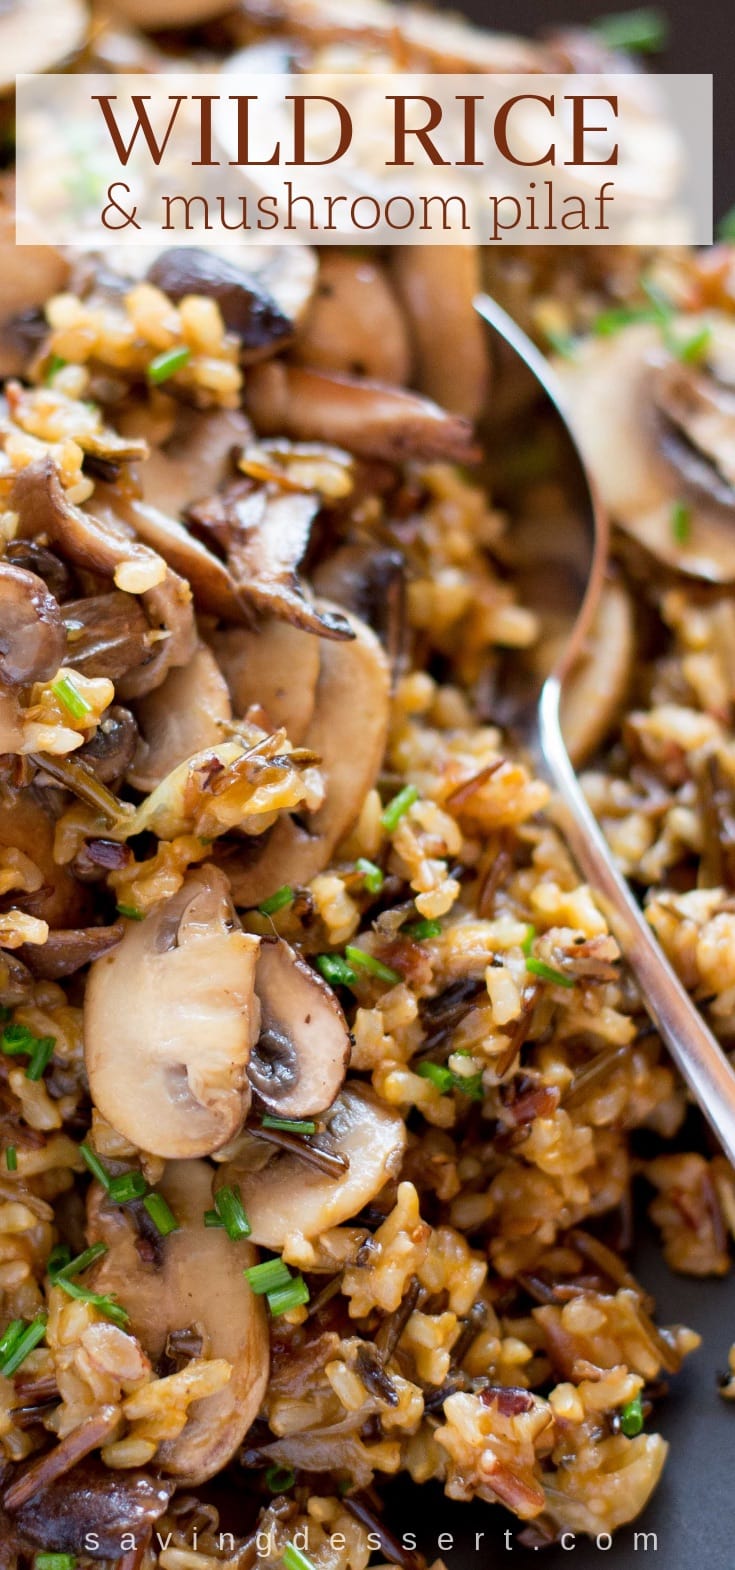 Wild Rice and Mushroom Pilaf -An easy and delicious make-ahead side dish loaded with a variety of mushrooms #wildrice #mushroom #ricepilaf #makeahead #sidedish #mushrooms #pilaf